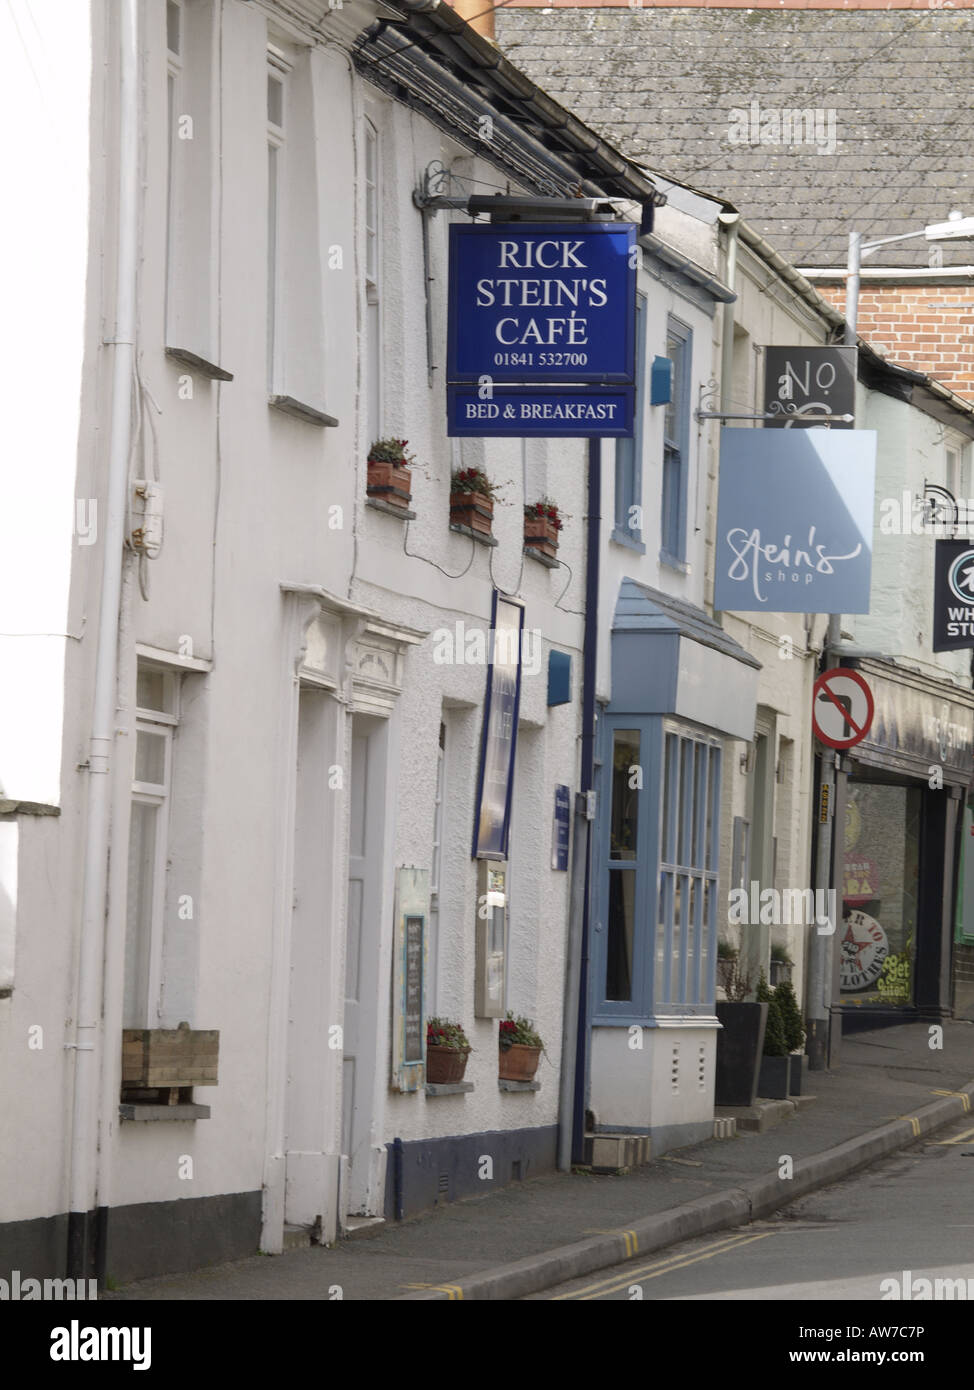 Rick Stein's Café and Shop, Padstow, Cornwall, UK Stock Photo